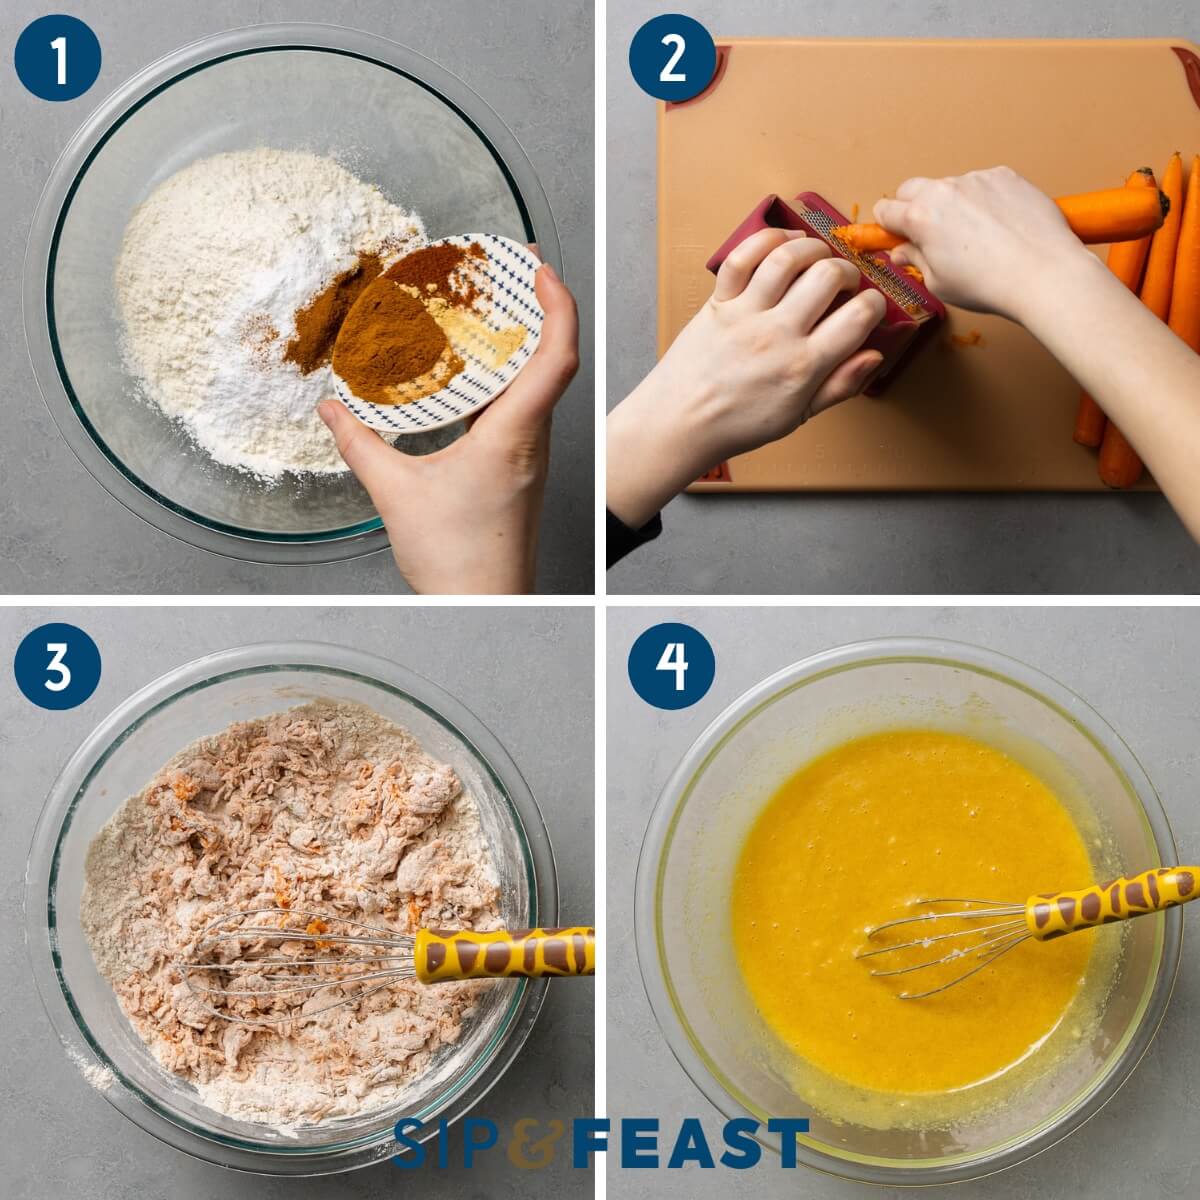 Carrot cake recipe collage group one showing combing dry ingredients into bowl, grating carrots, mixing carrots into bowl, and mixing wet ingredients in separate bowl.